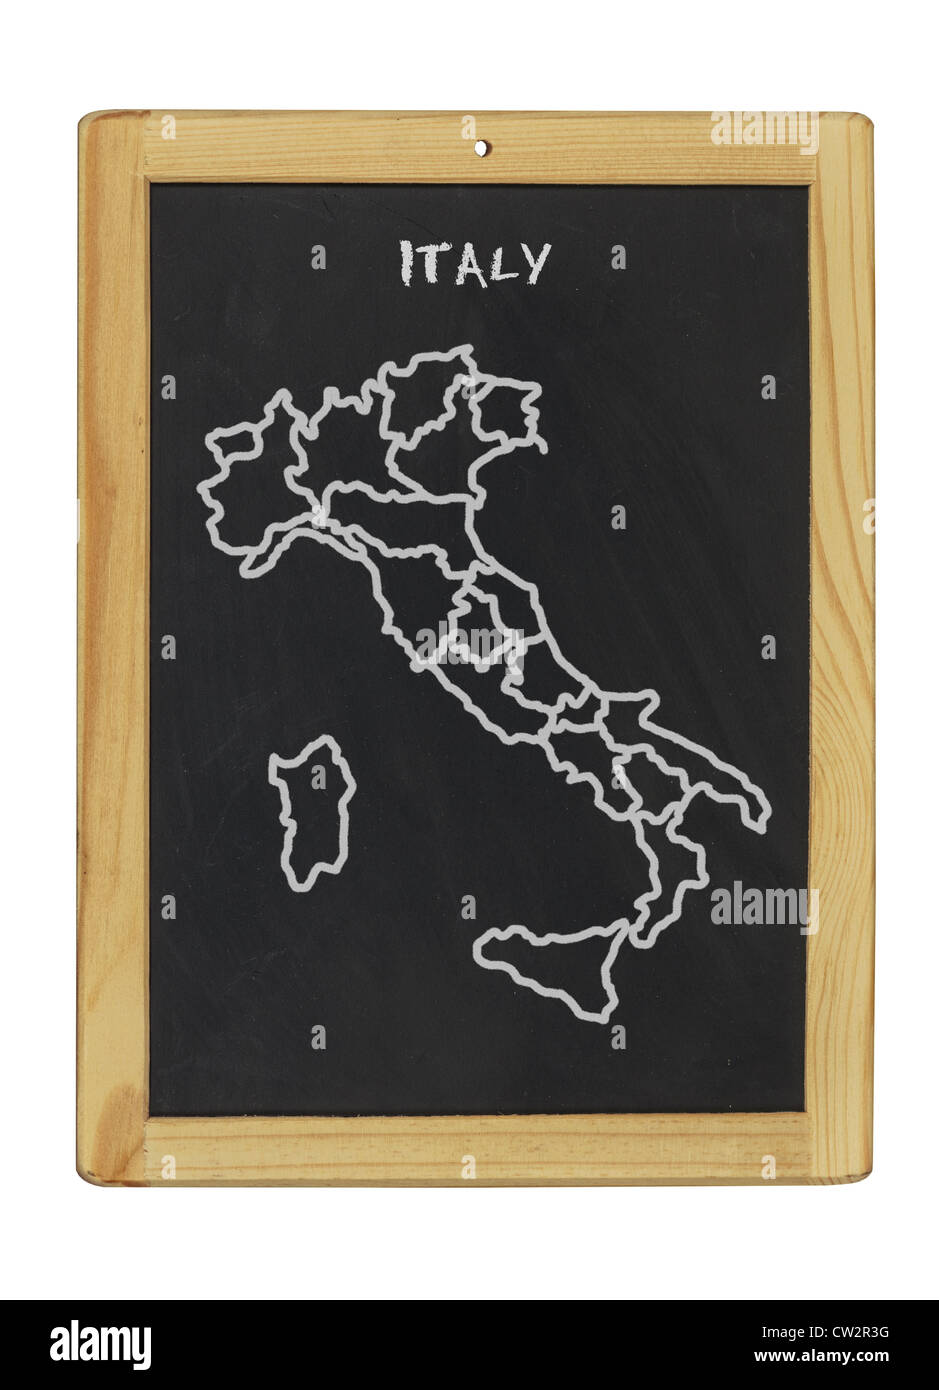 map of italy on a chalkboard Stock Photo